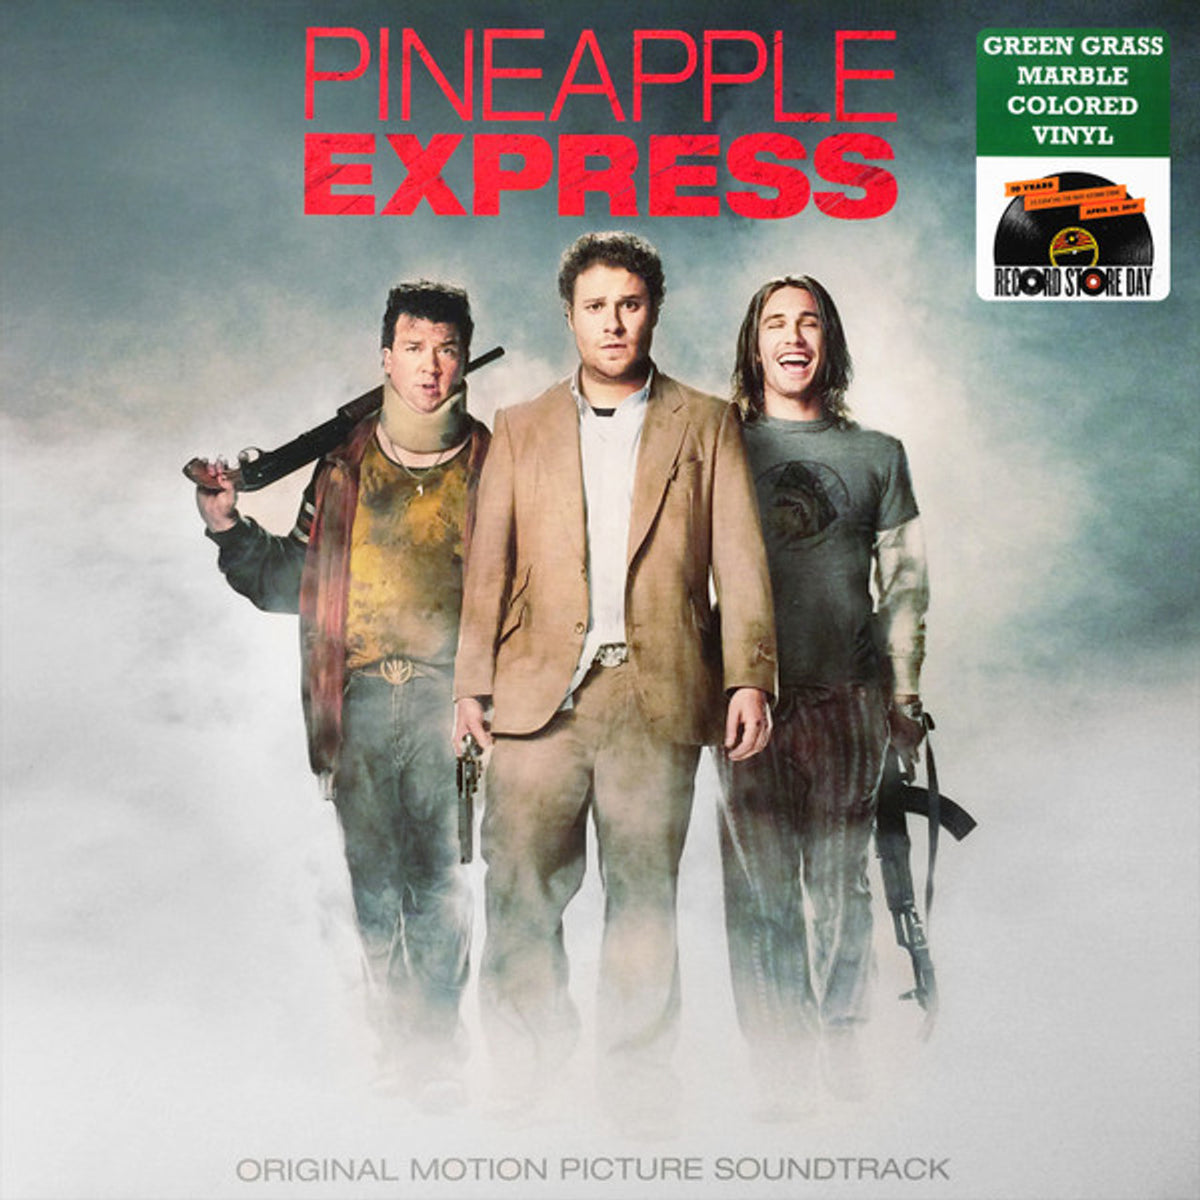 Pineapple Express Soundtrack (Distro Title)